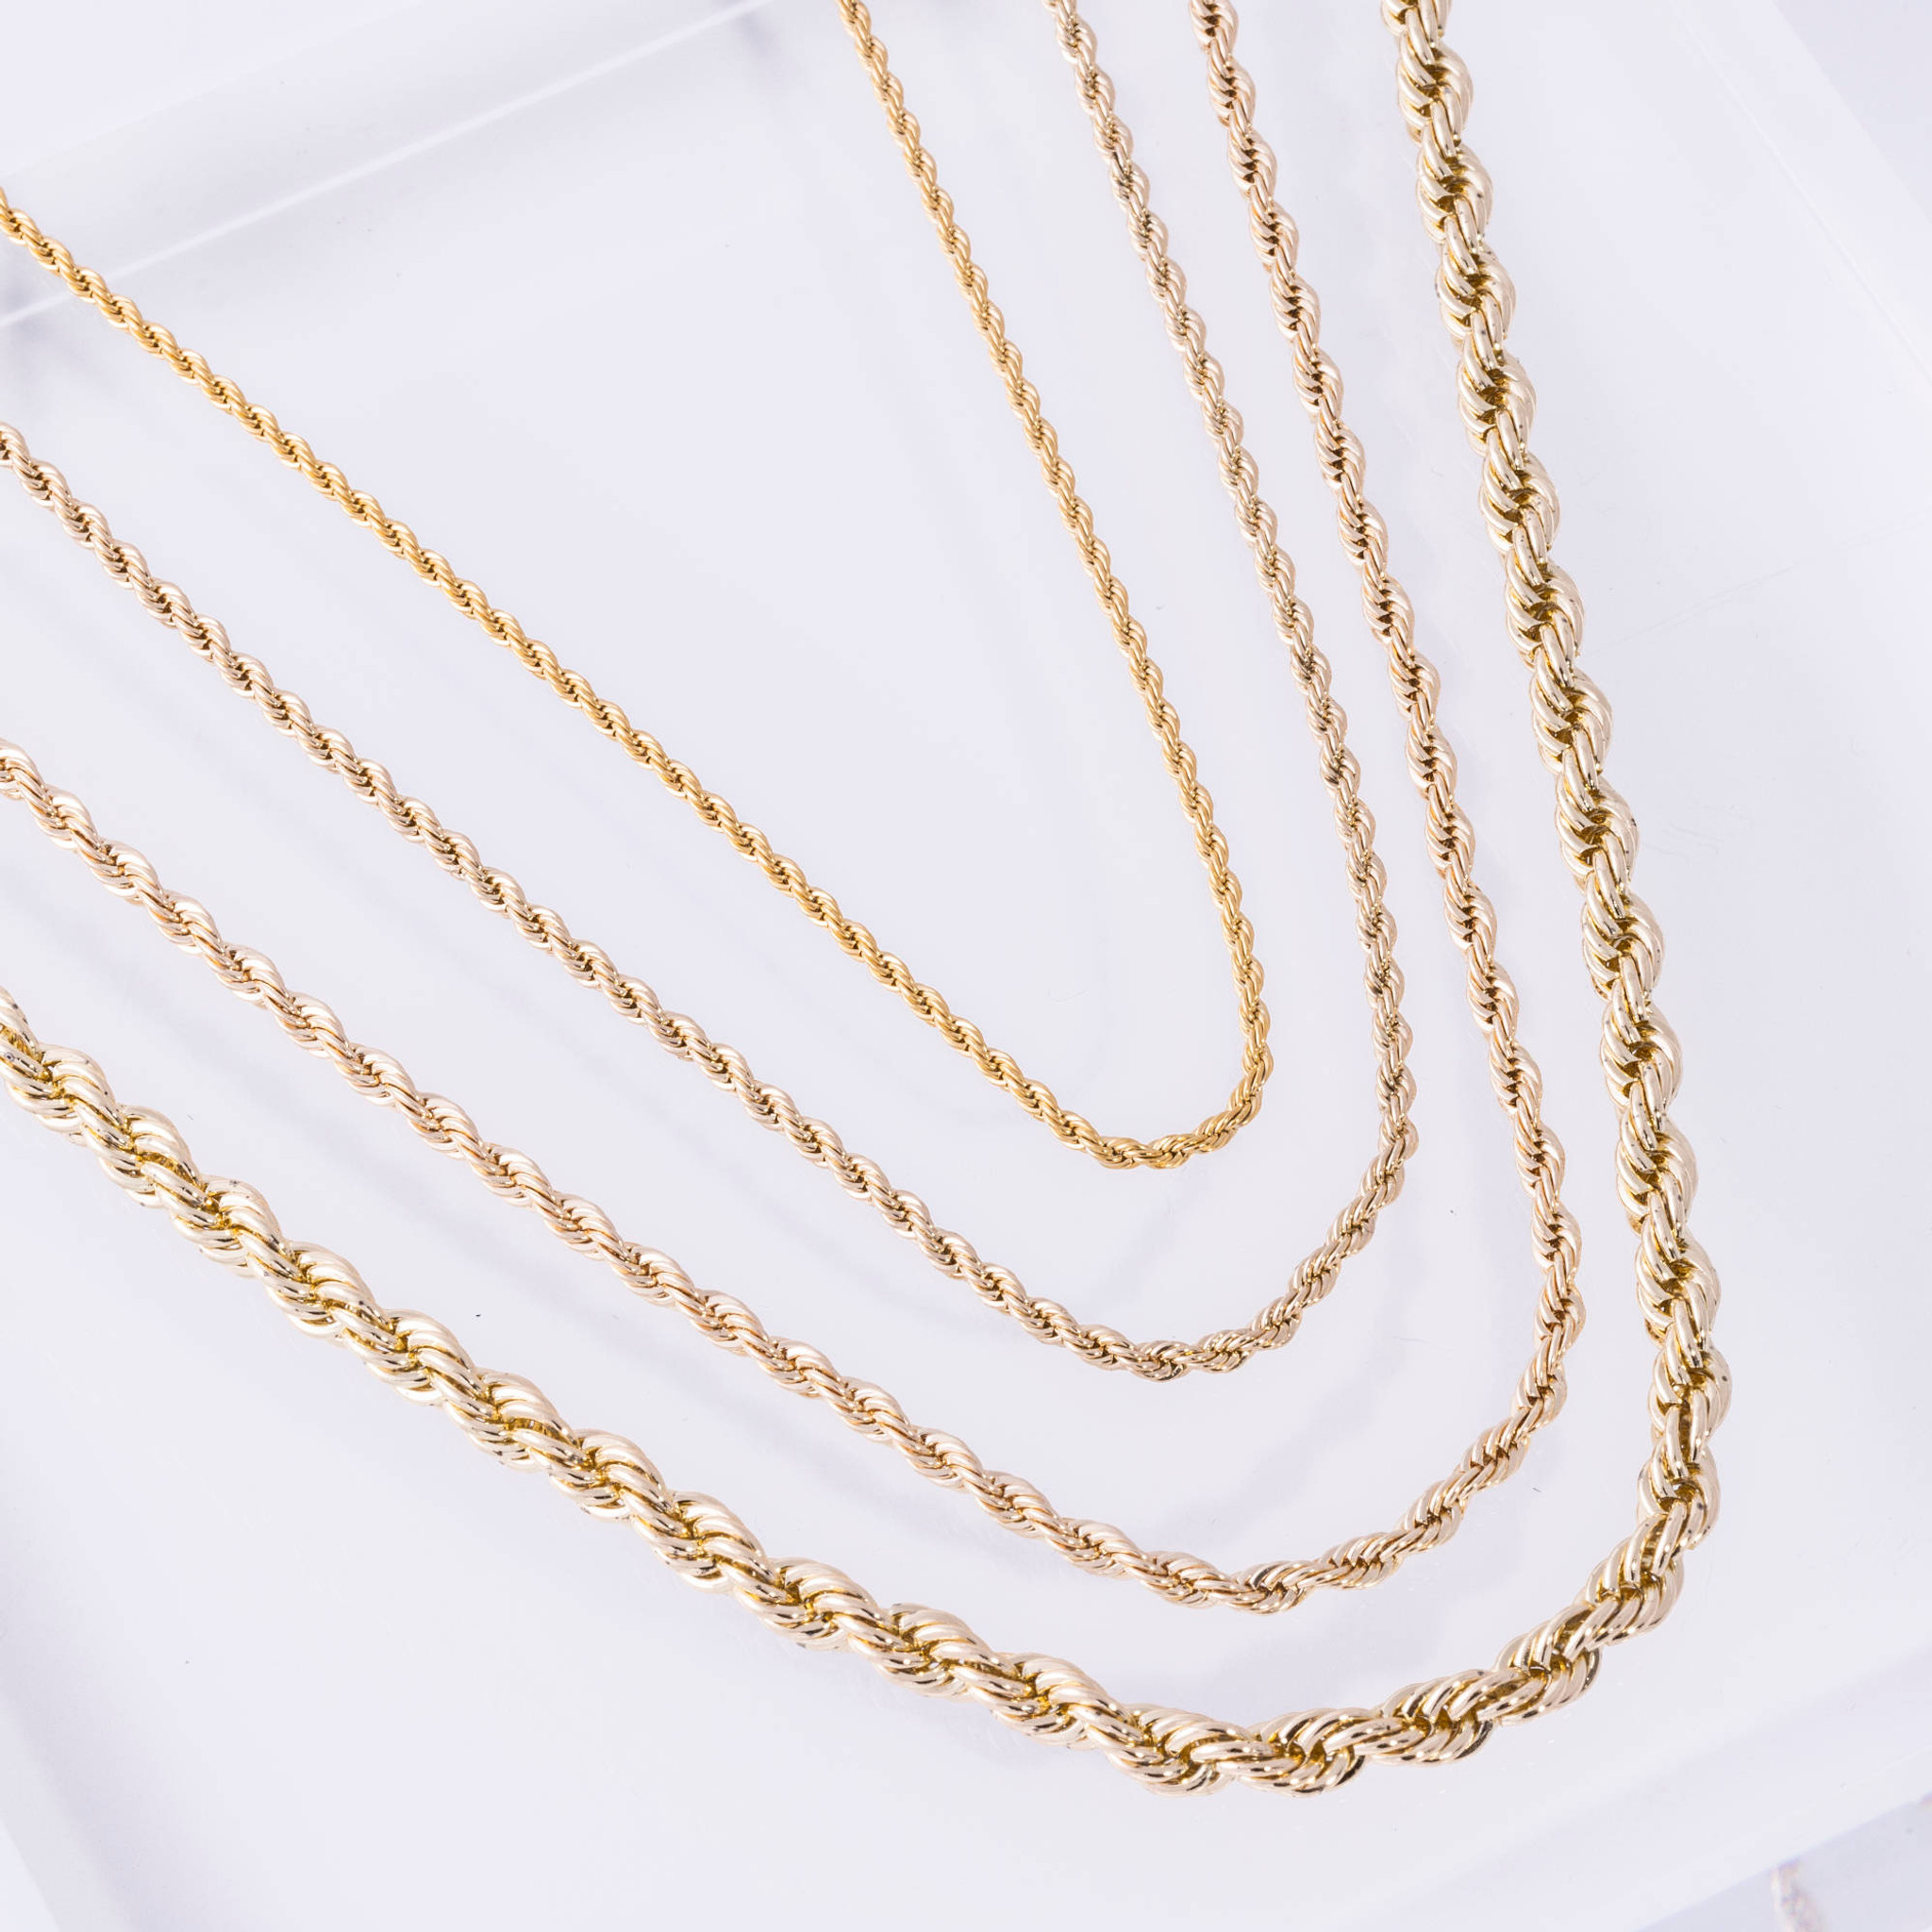 Presenting variations of the 10k gold rope chain, featuring textured diamond-cut links that capture intricate grooves.